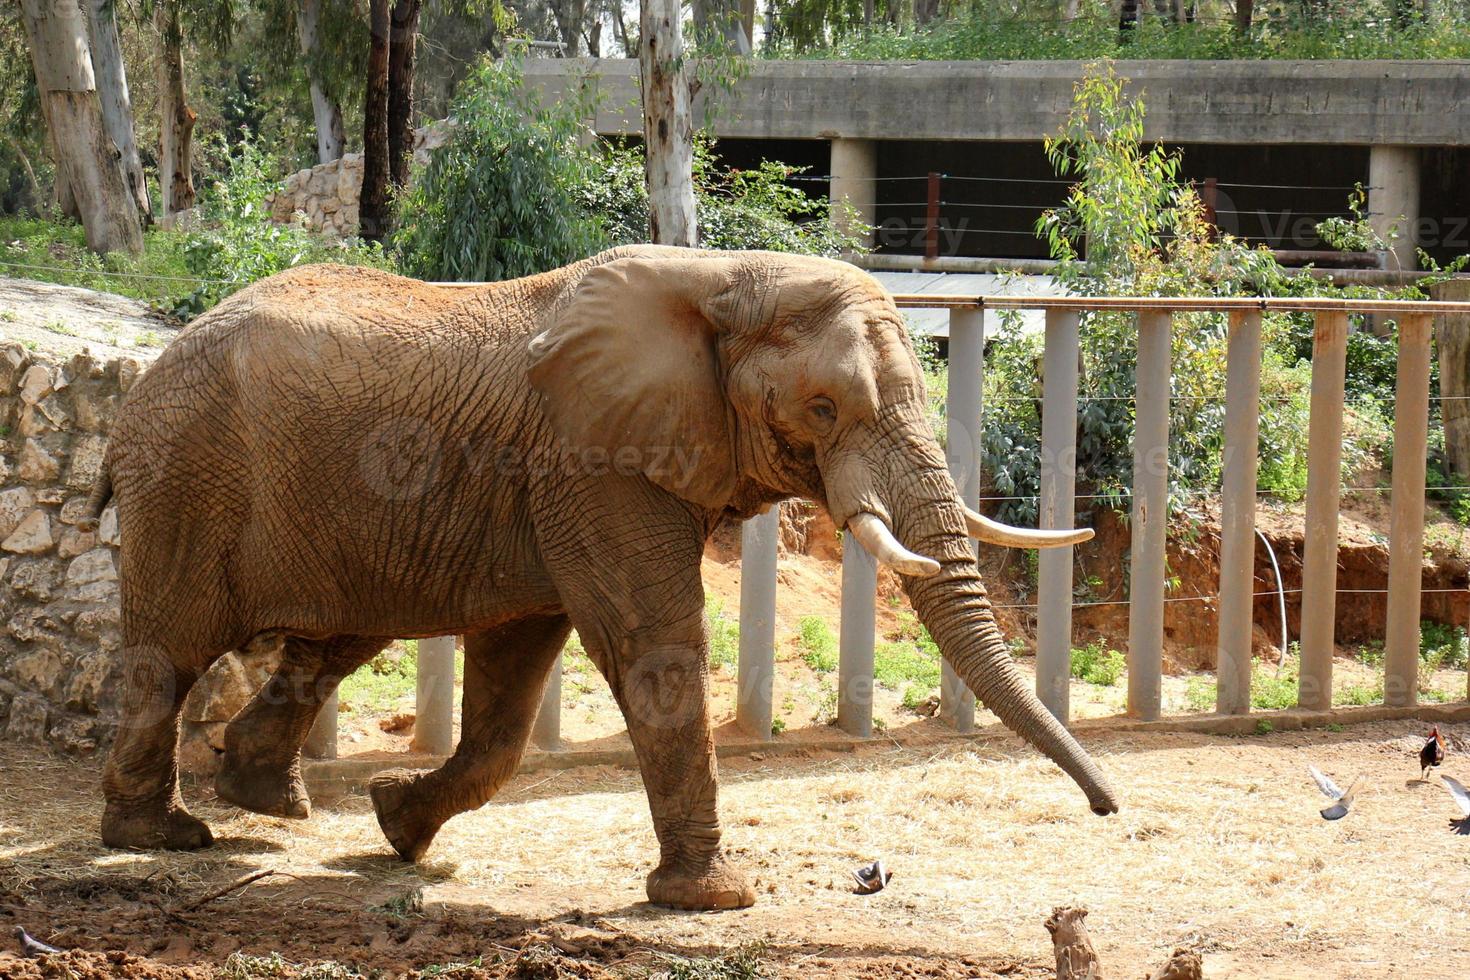 An African elephant lives in a zoo in Israel. photo